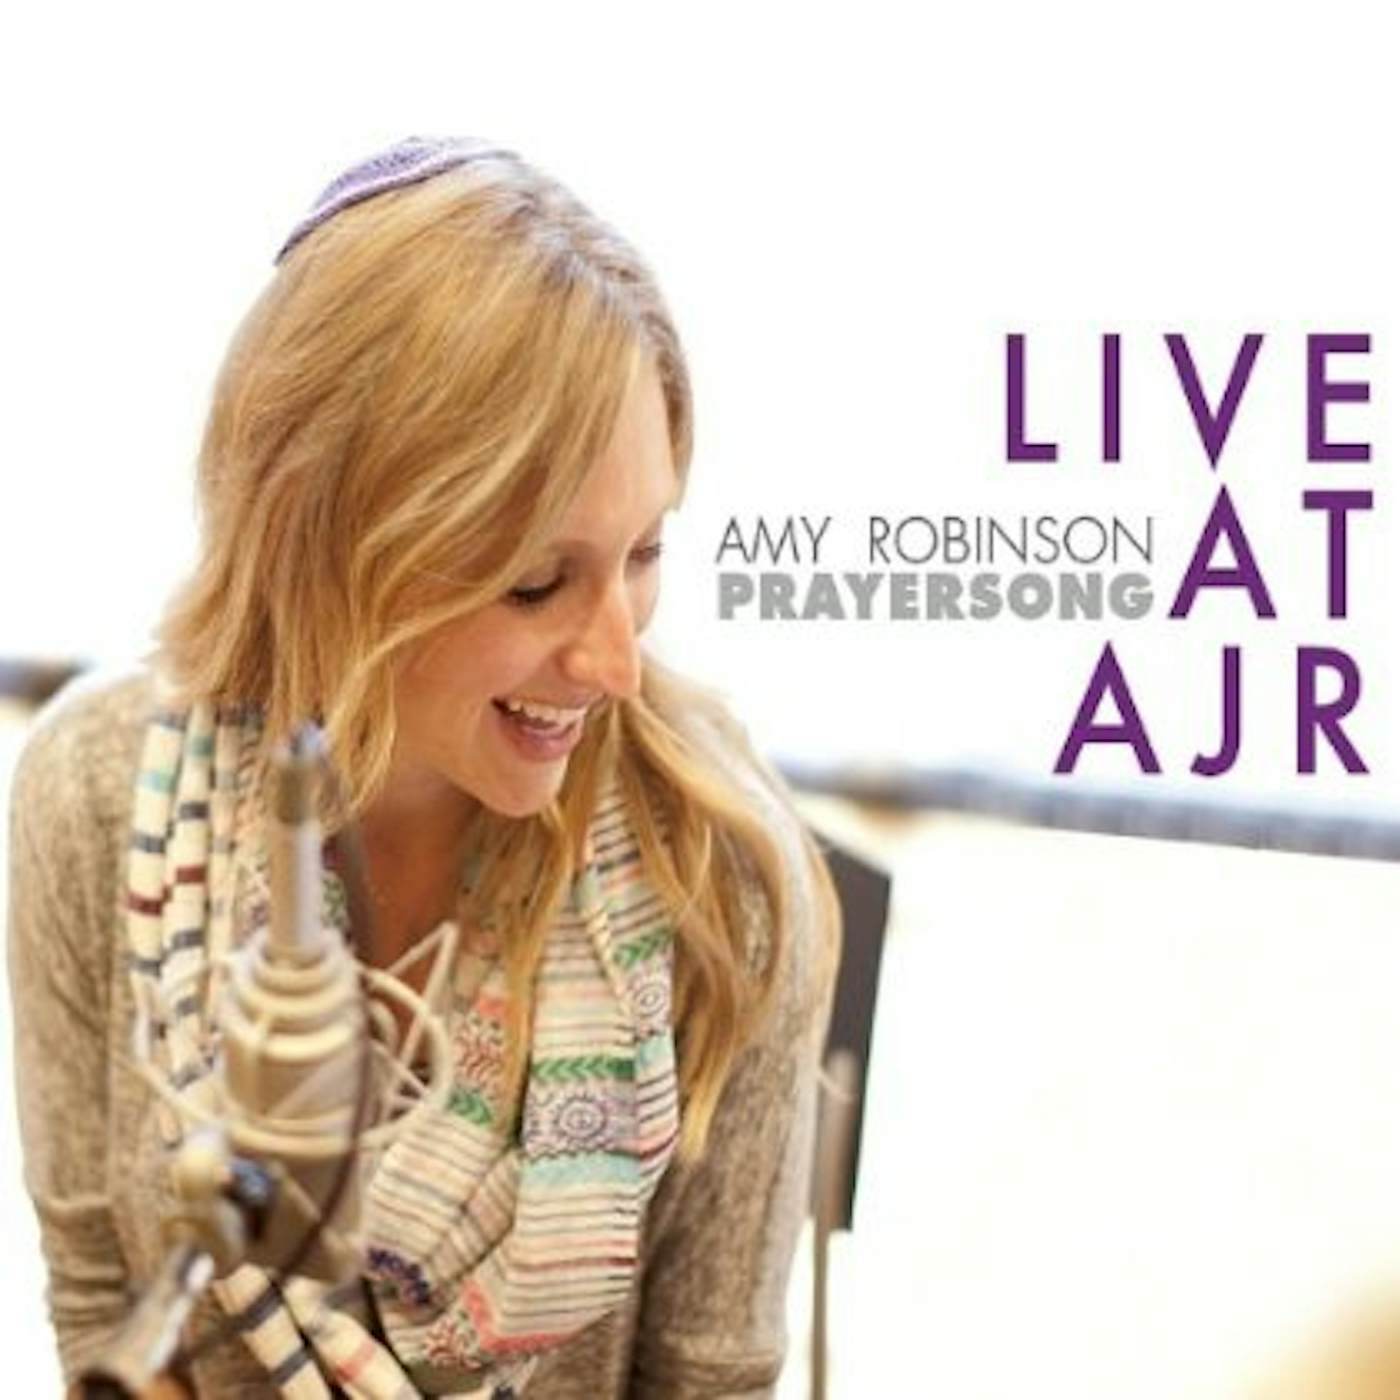 Amy Robinson LIVE AT ACADEMY FOR JEWISH RELIGION CD